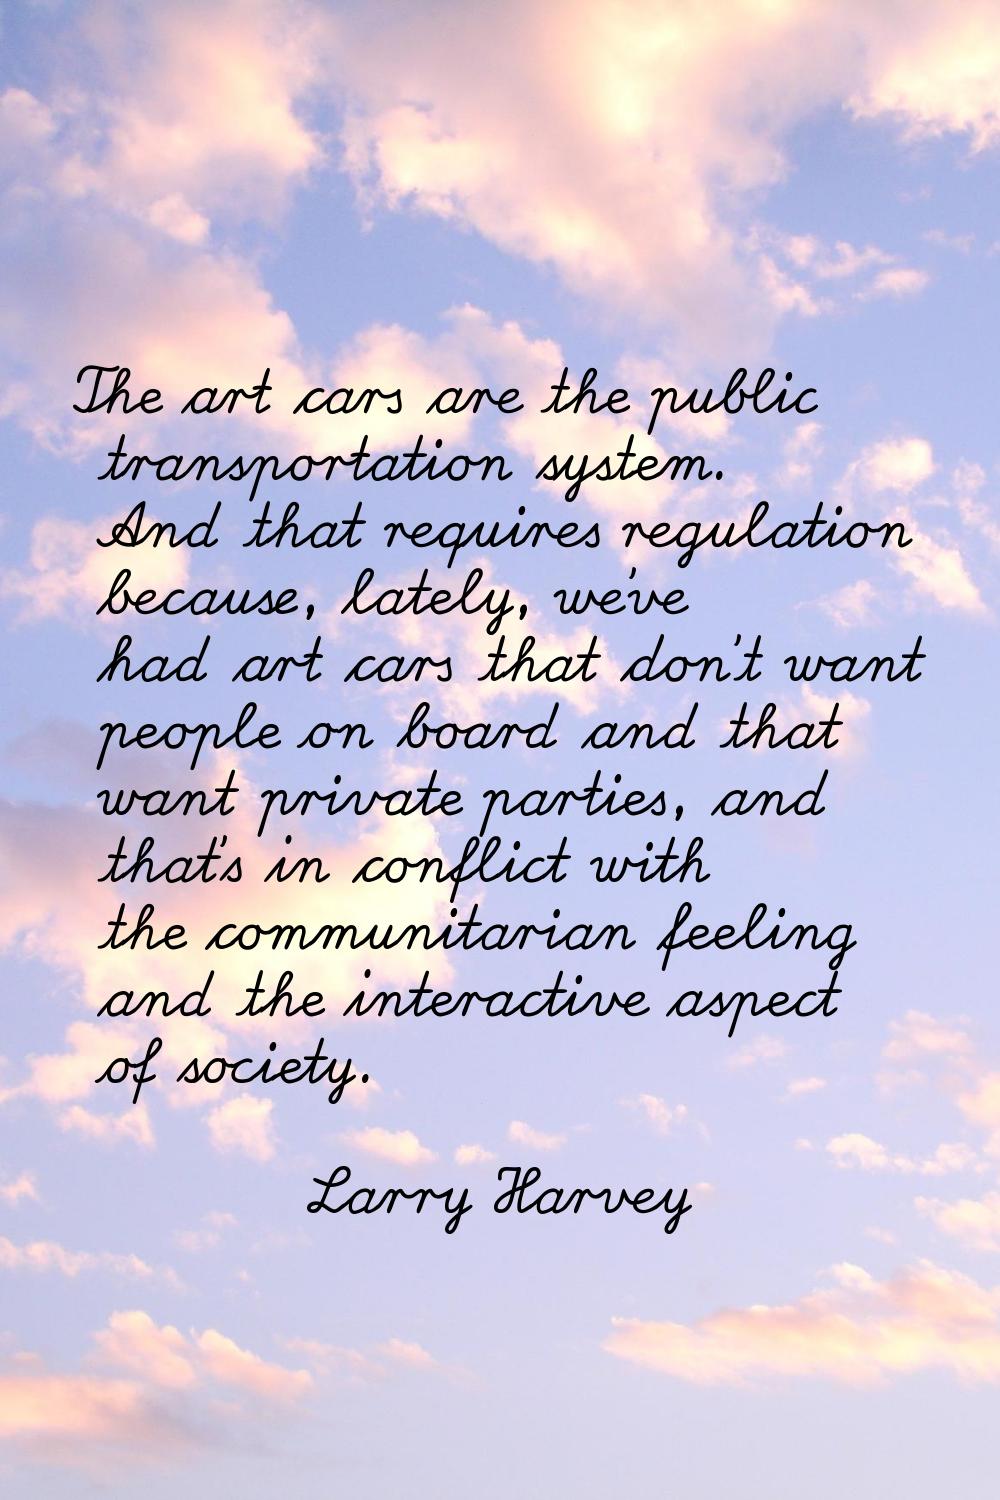 The art cars are the public transportation system. And that requires regulation because, lately, we